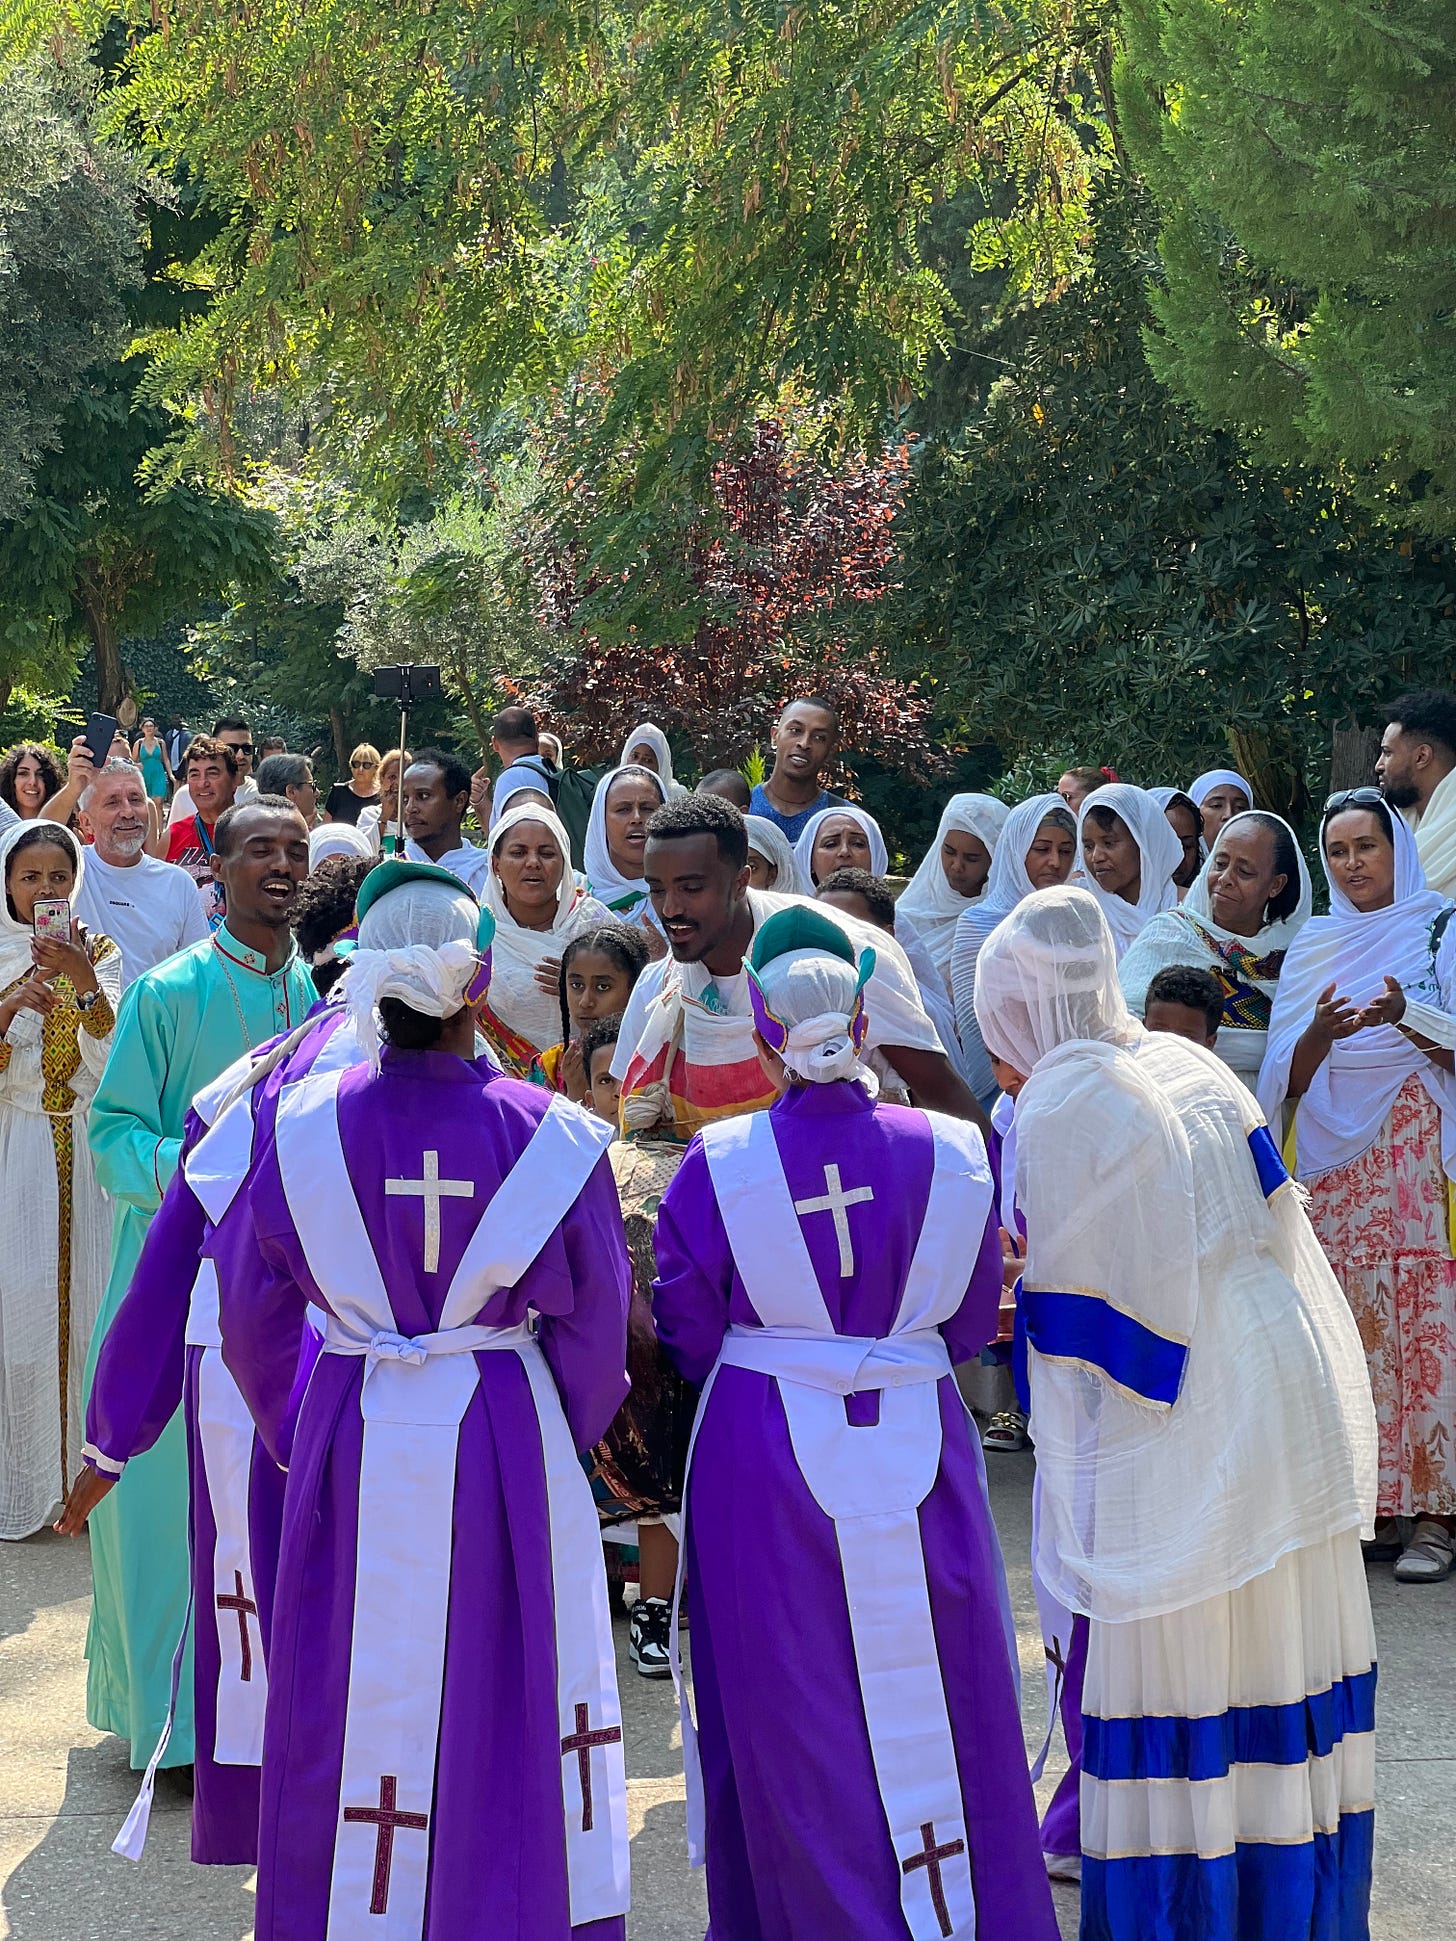 A group of Ethiopian worshippers in Turkey